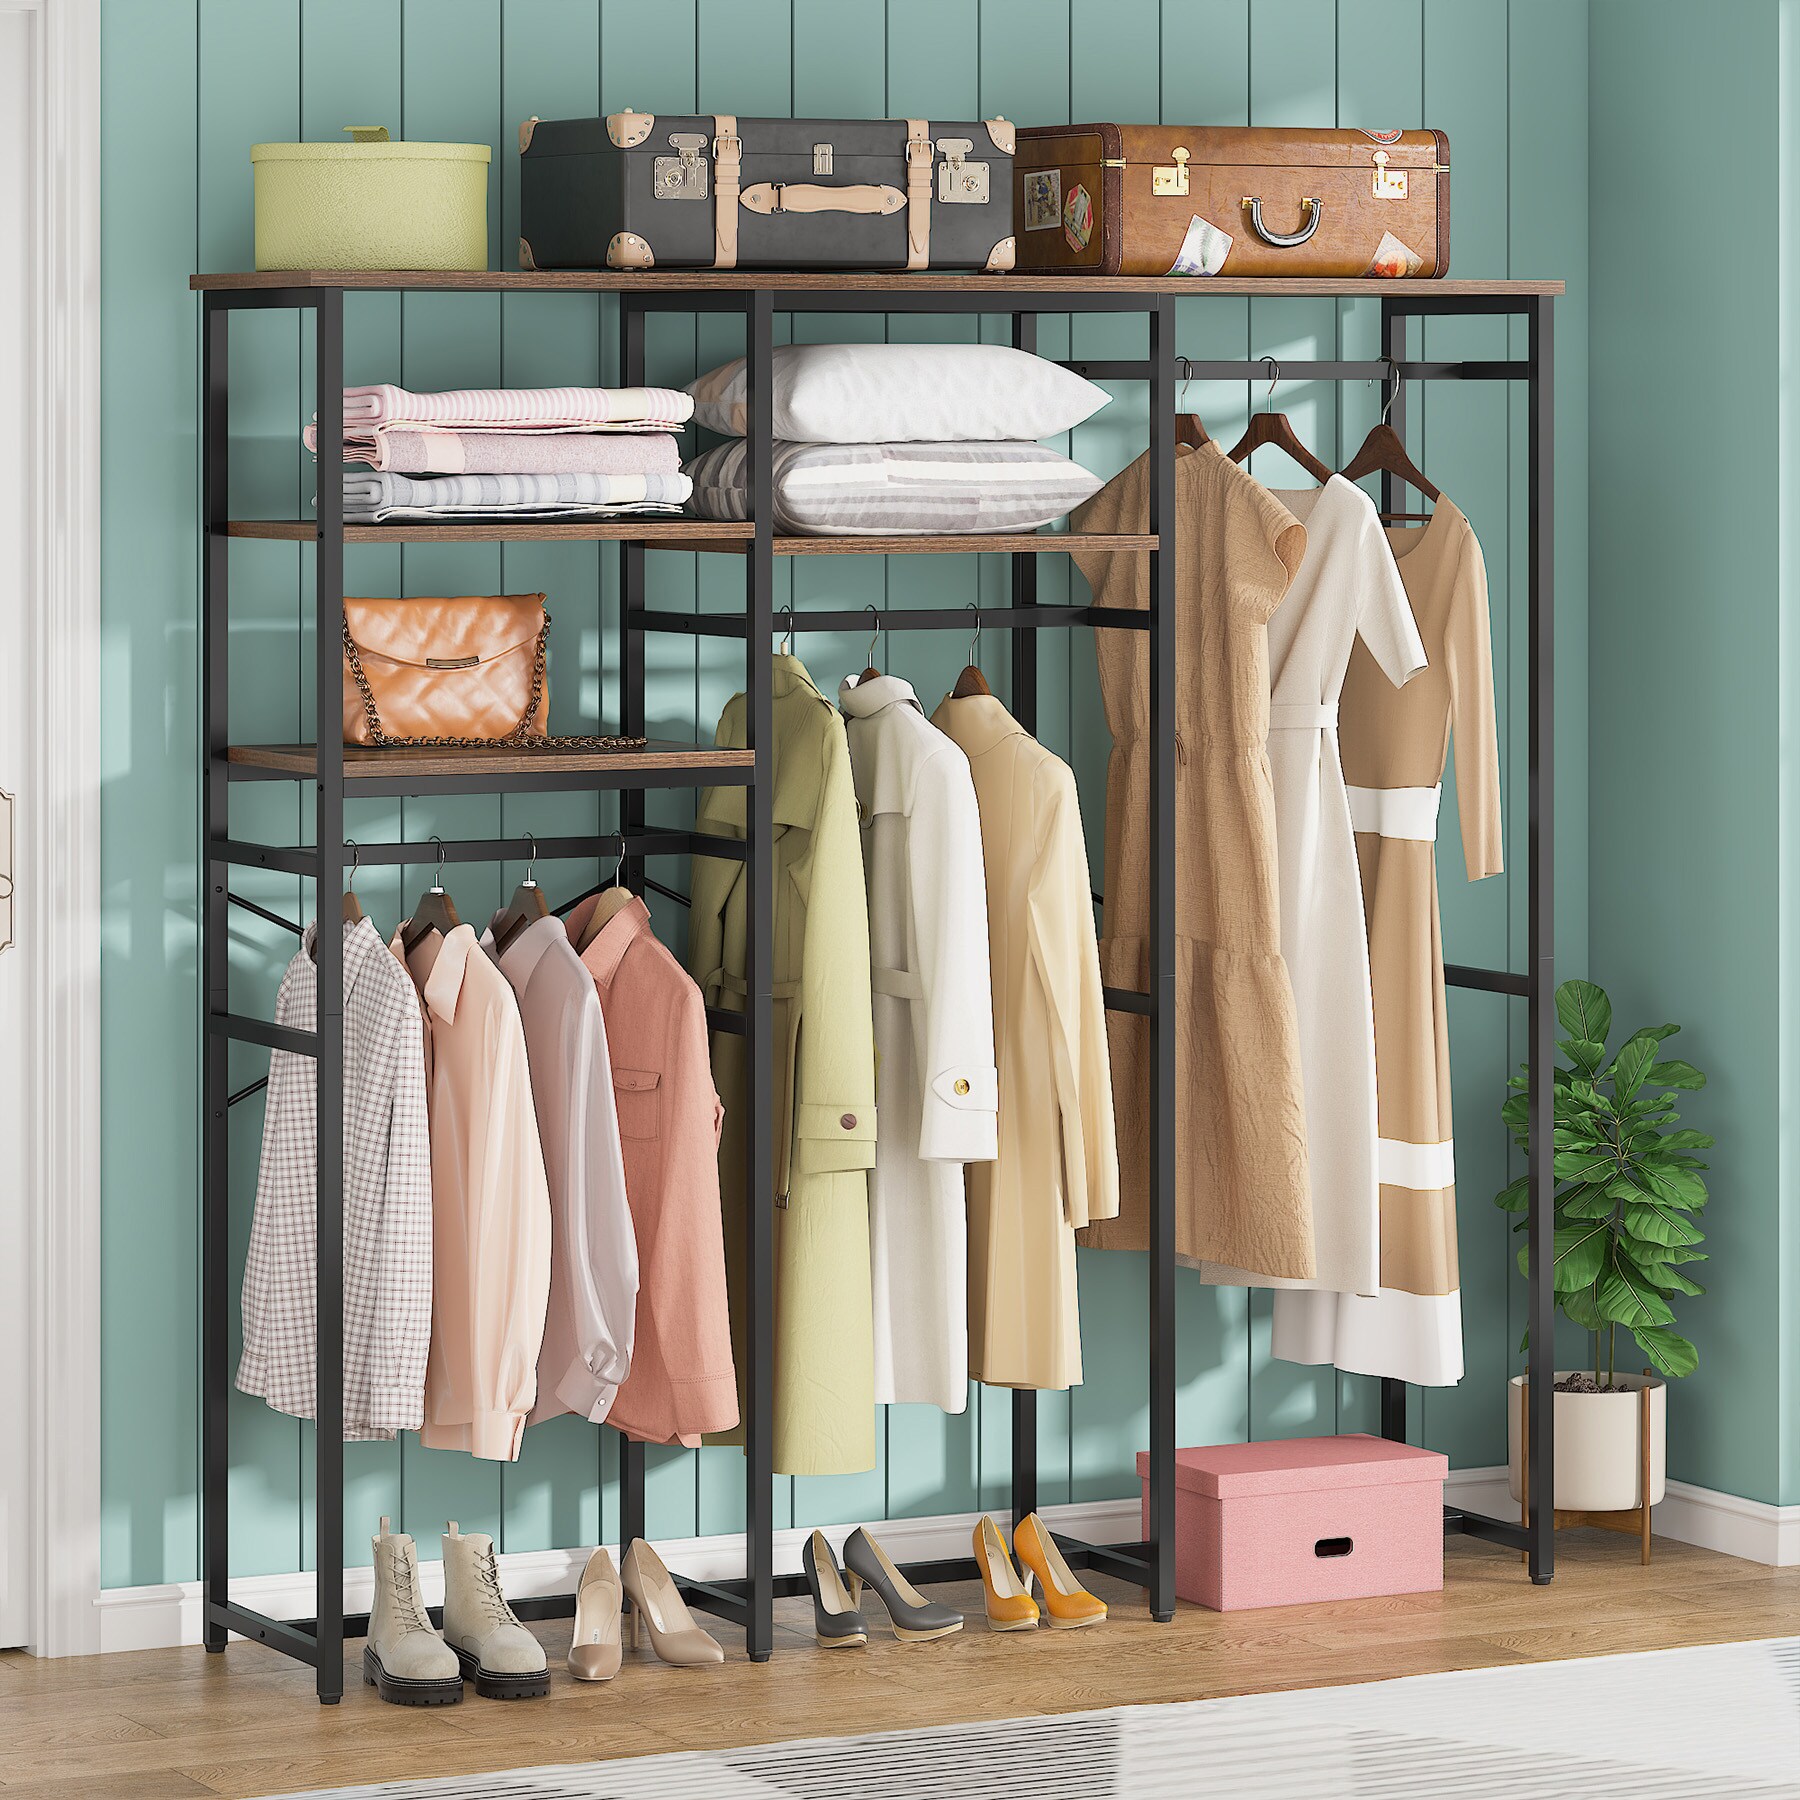  Tribesigns Freestanding Closet Organizer, 75 inch Clothing Rack  with Shelves, Heavy Duty Garment Rack Wardrobe Closet with Hanging Rods :  Home & Kitchen